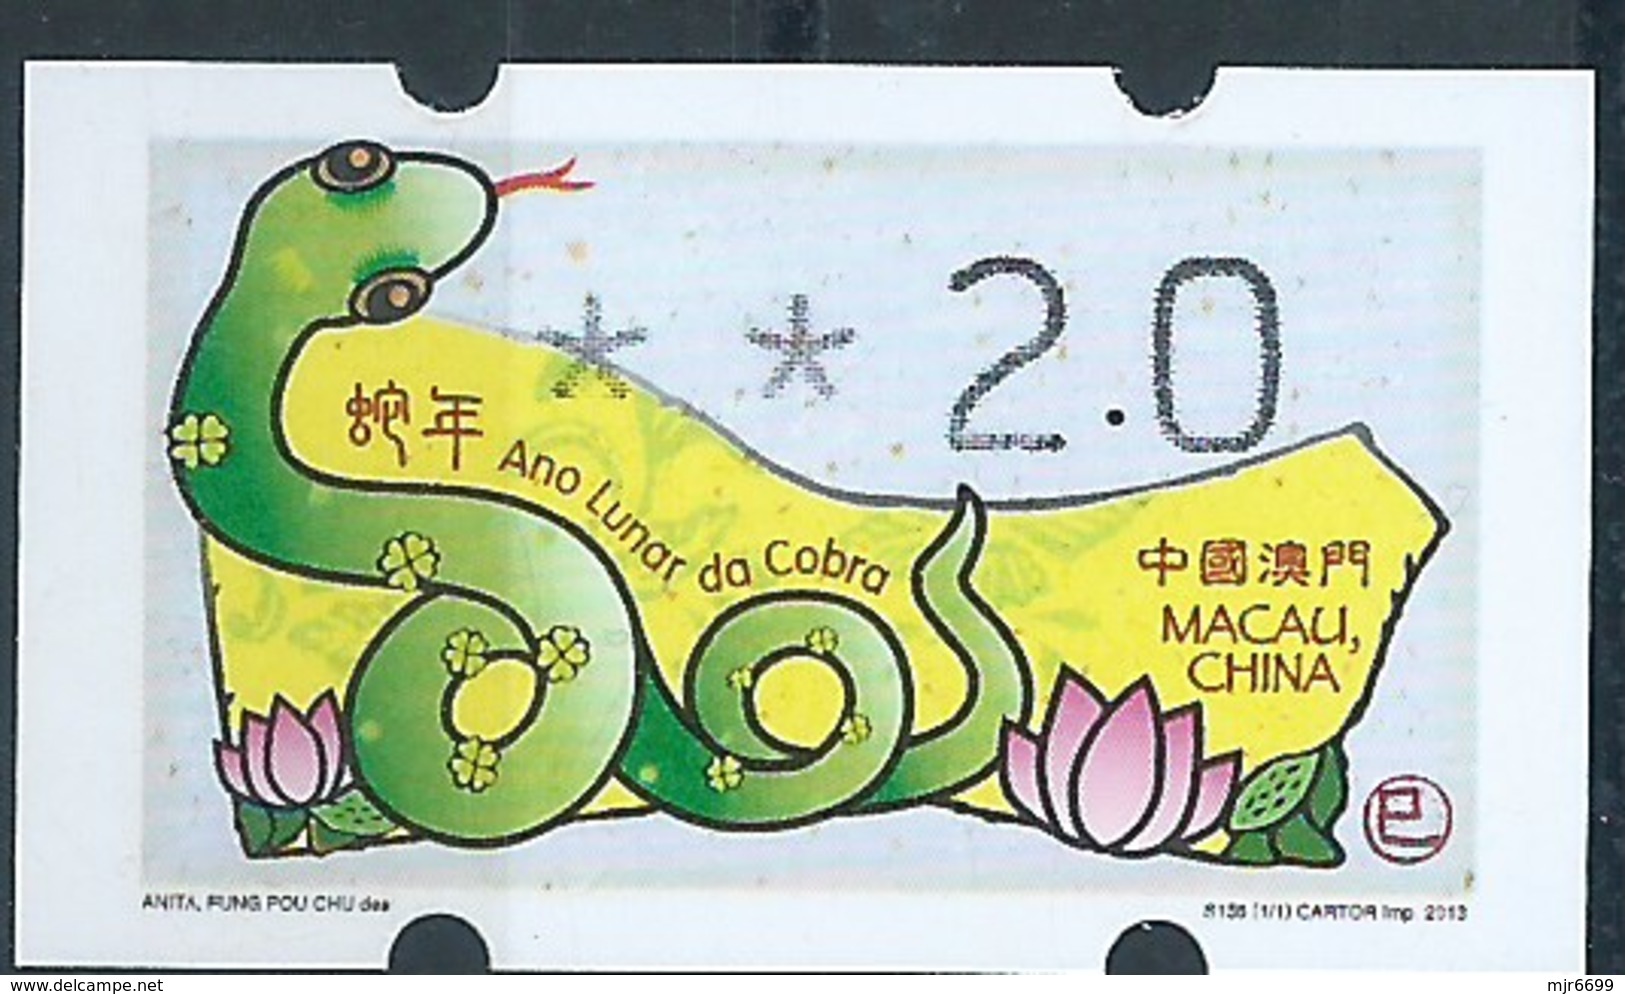 MACAU ATM LABELS, 2013 YEAR OF THE SNAKE ISSUE 2.00 PAT FINE UM MINT - Automaten